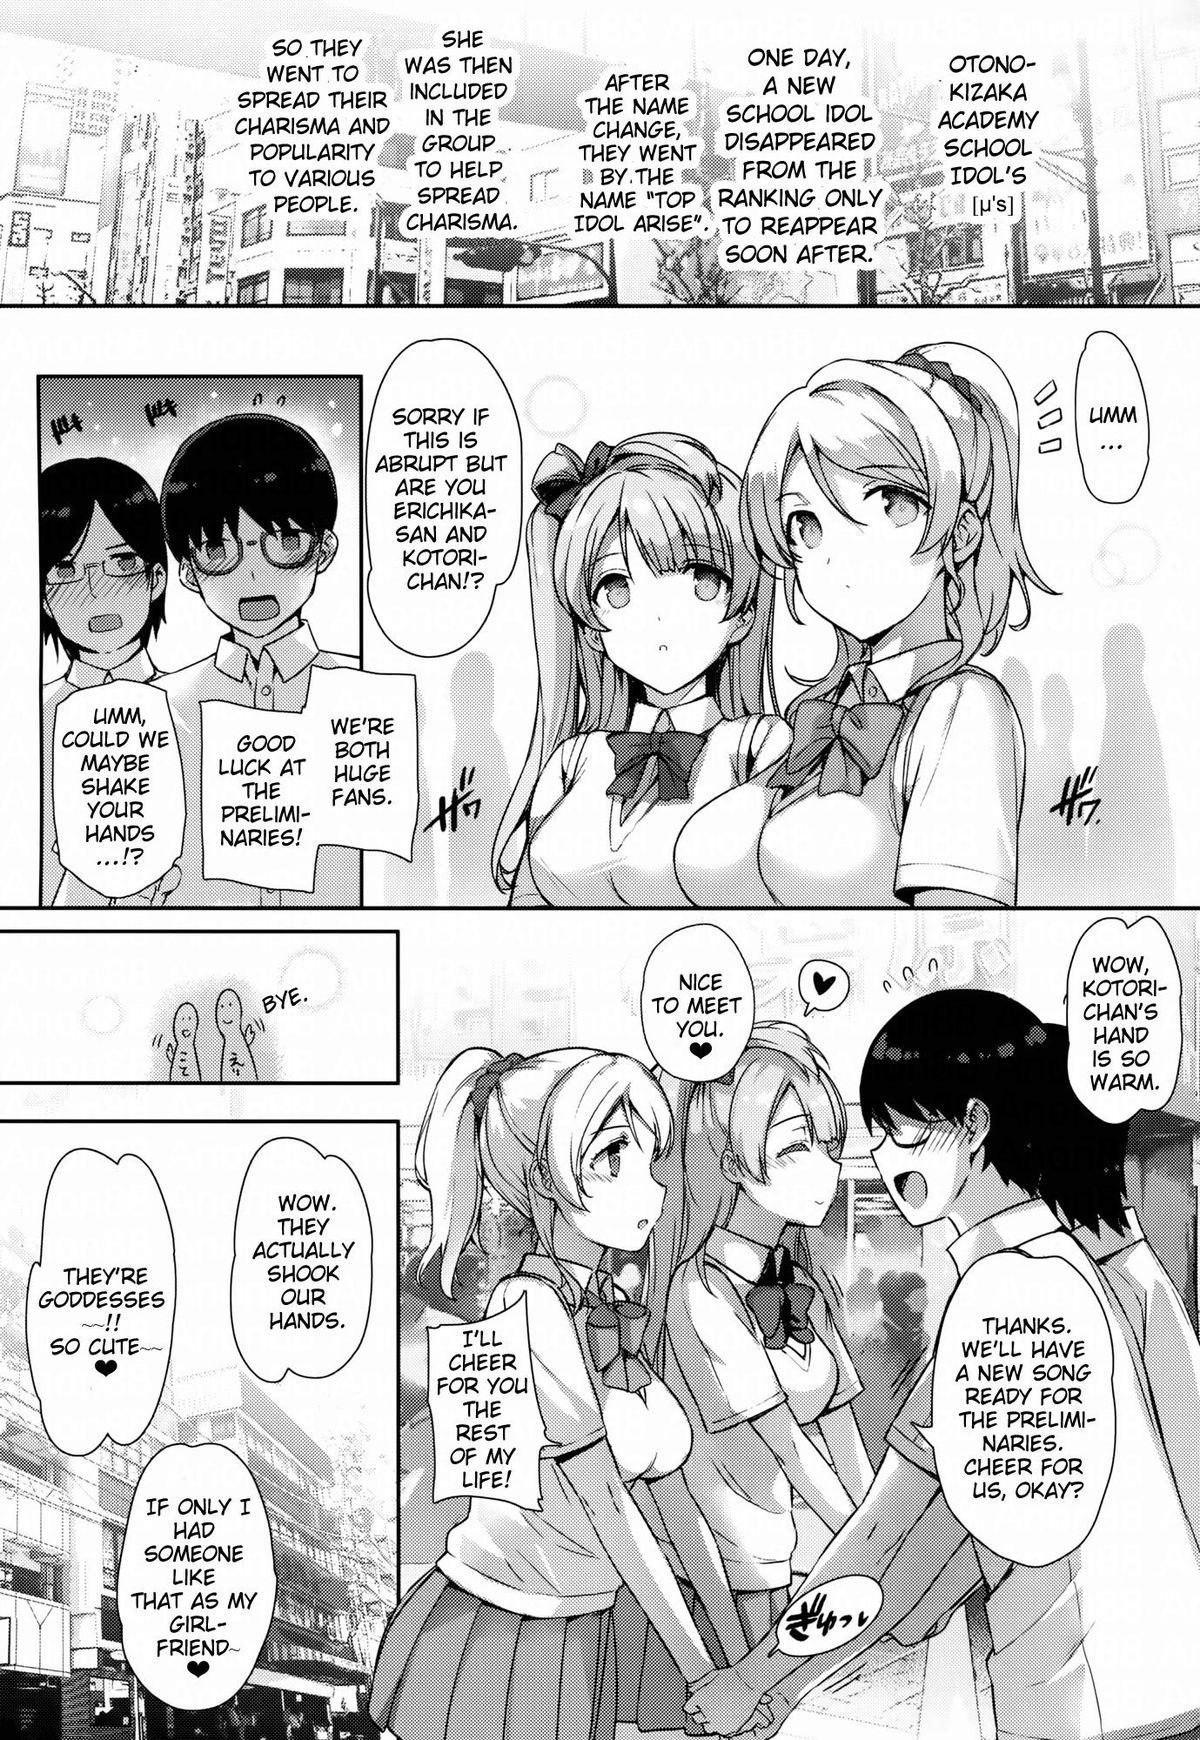 Chica SEX p.a.r.t.y - Love live Big - Page 2